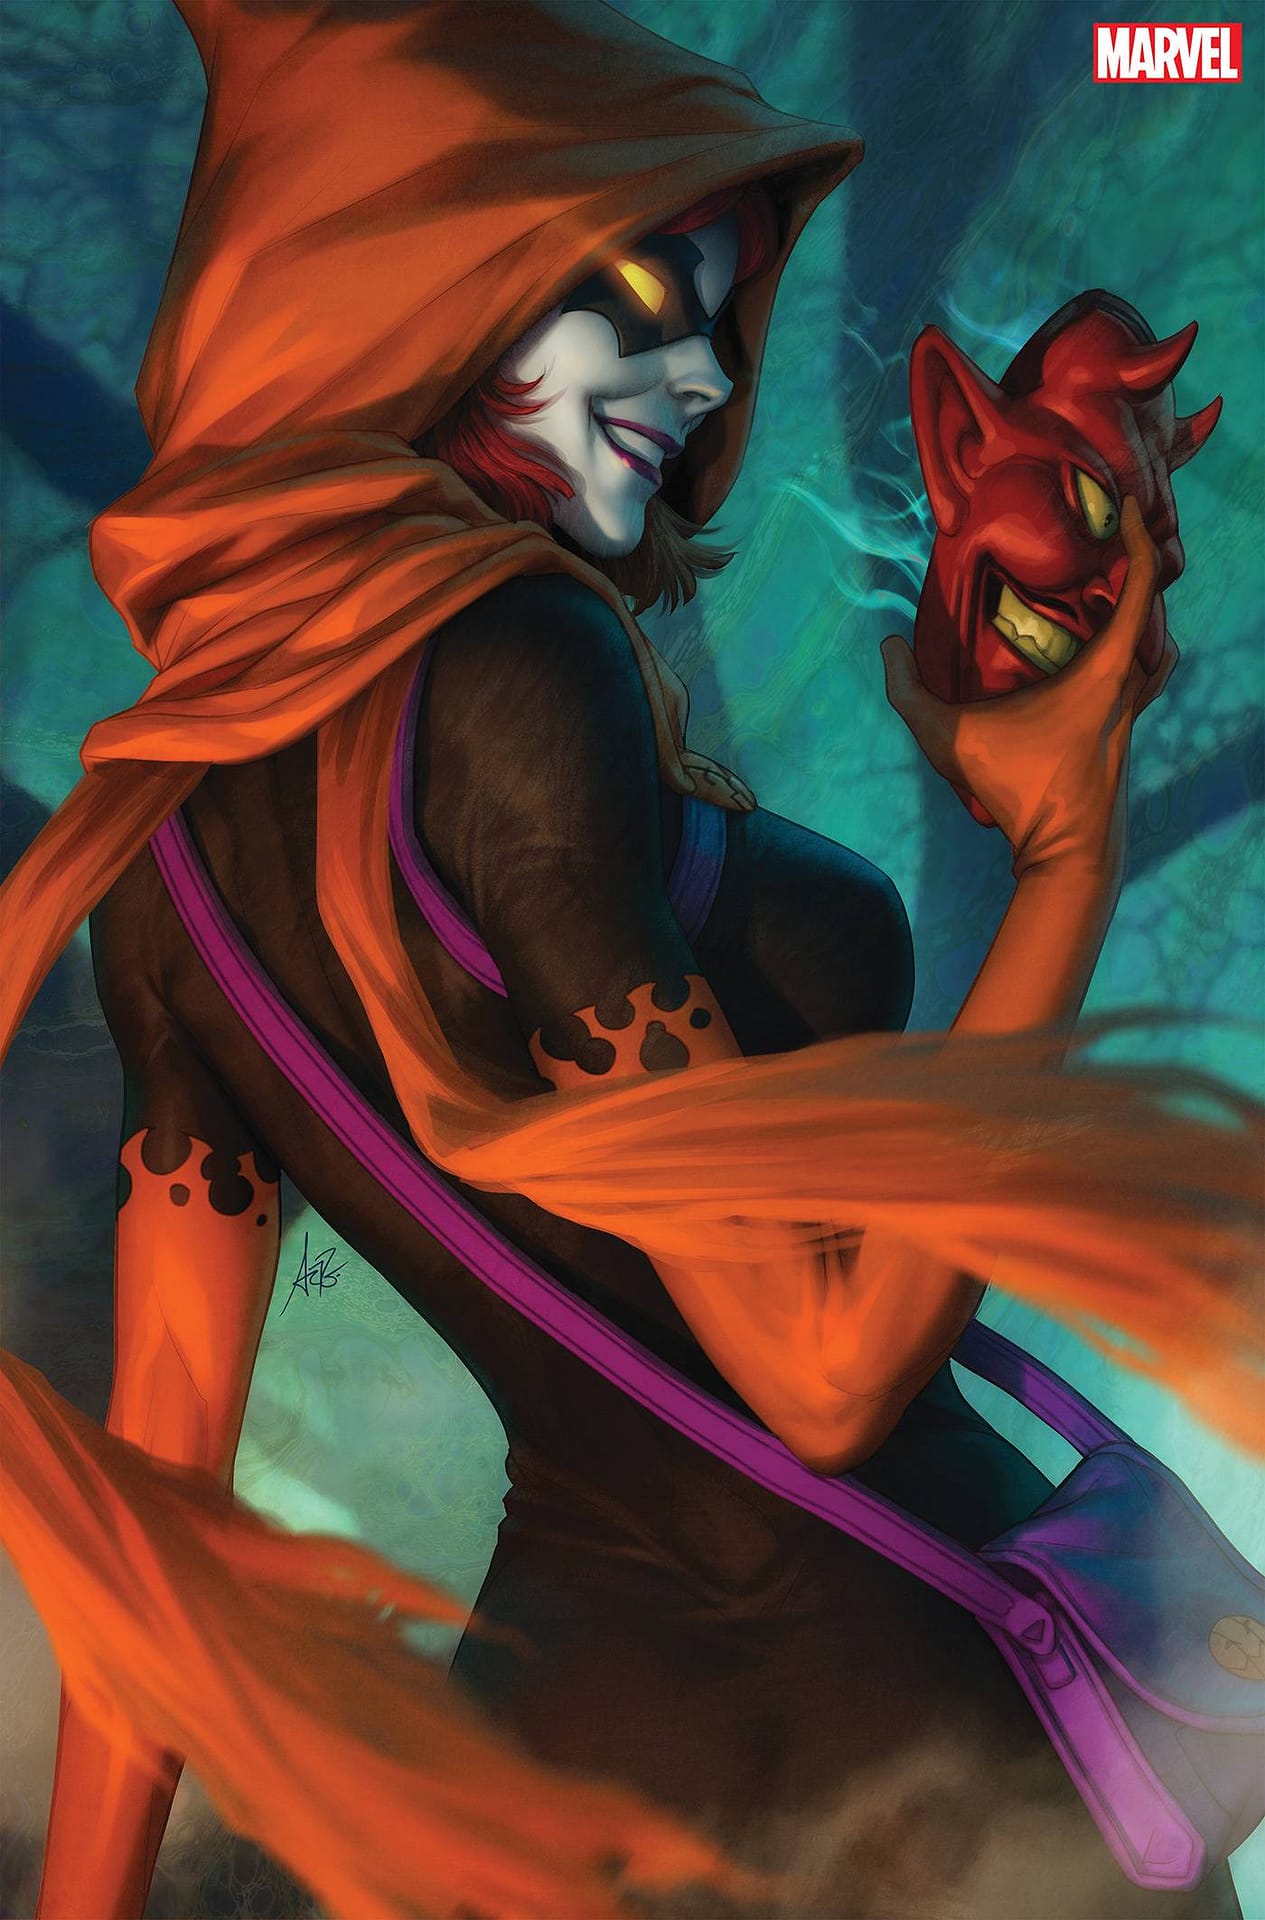 Hallows Eve #1 Artgerm Virgin 1-200 Variant Cover - Legacy Comics and Cards | Trading Card Games, Comic Books, and More!